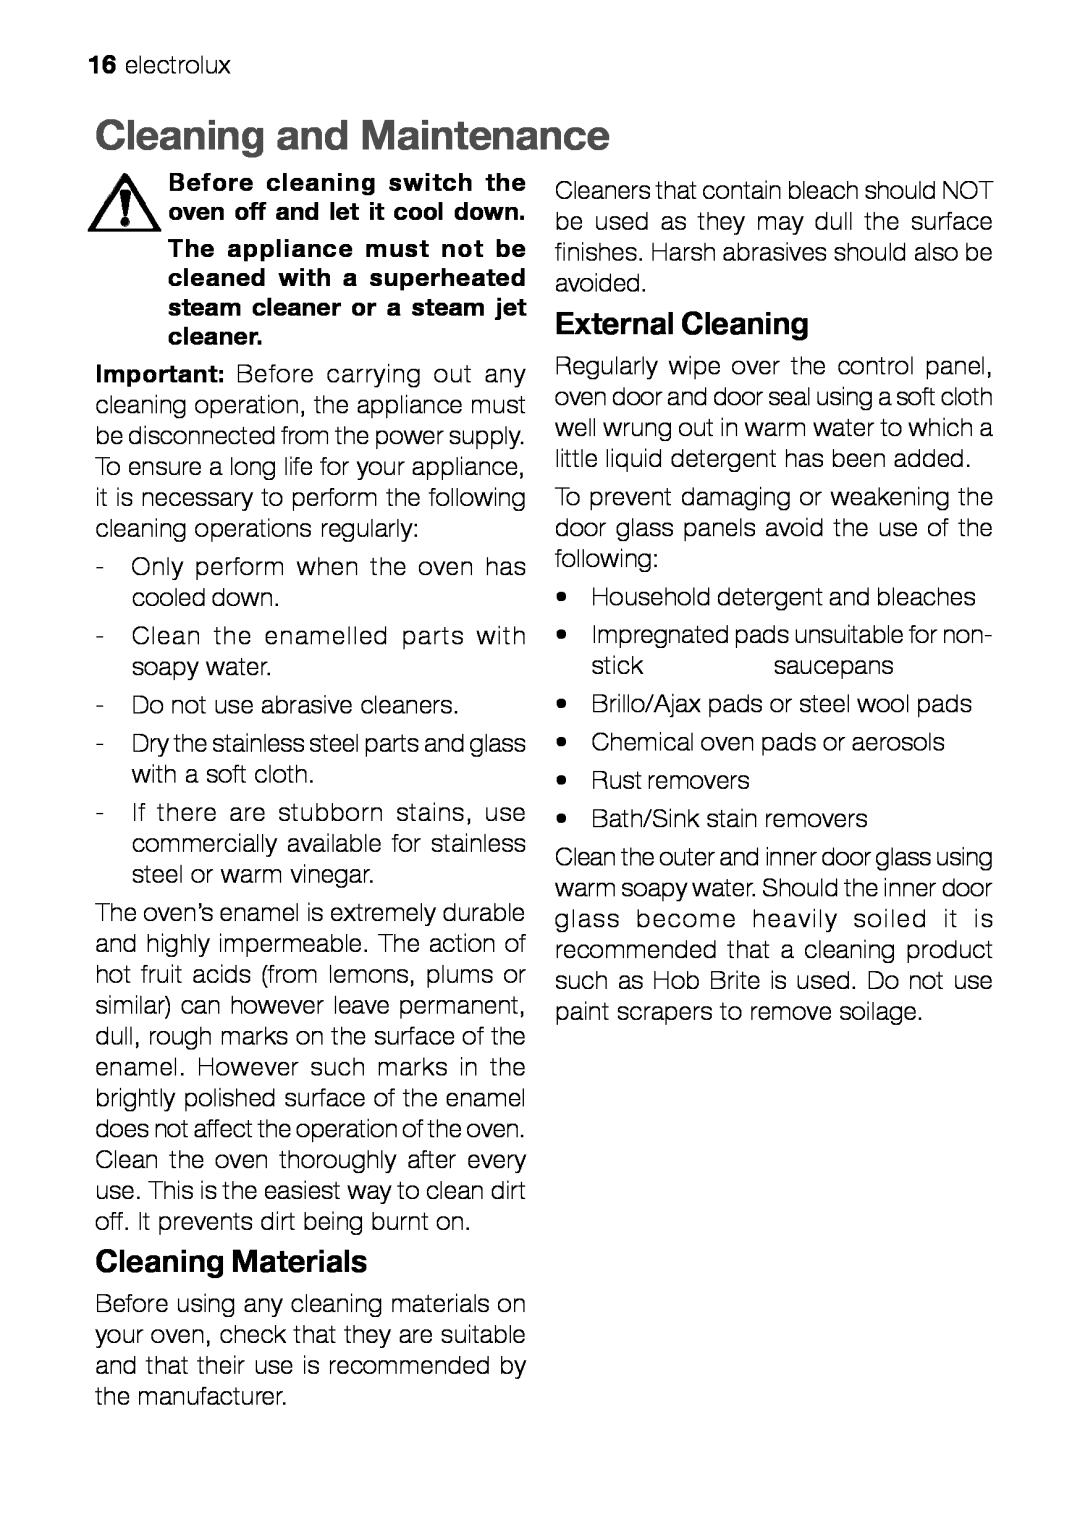 Electrolux EOB 21001 user manual Cleaning and Maintenance, External Cleaning, Cleaning Materials 